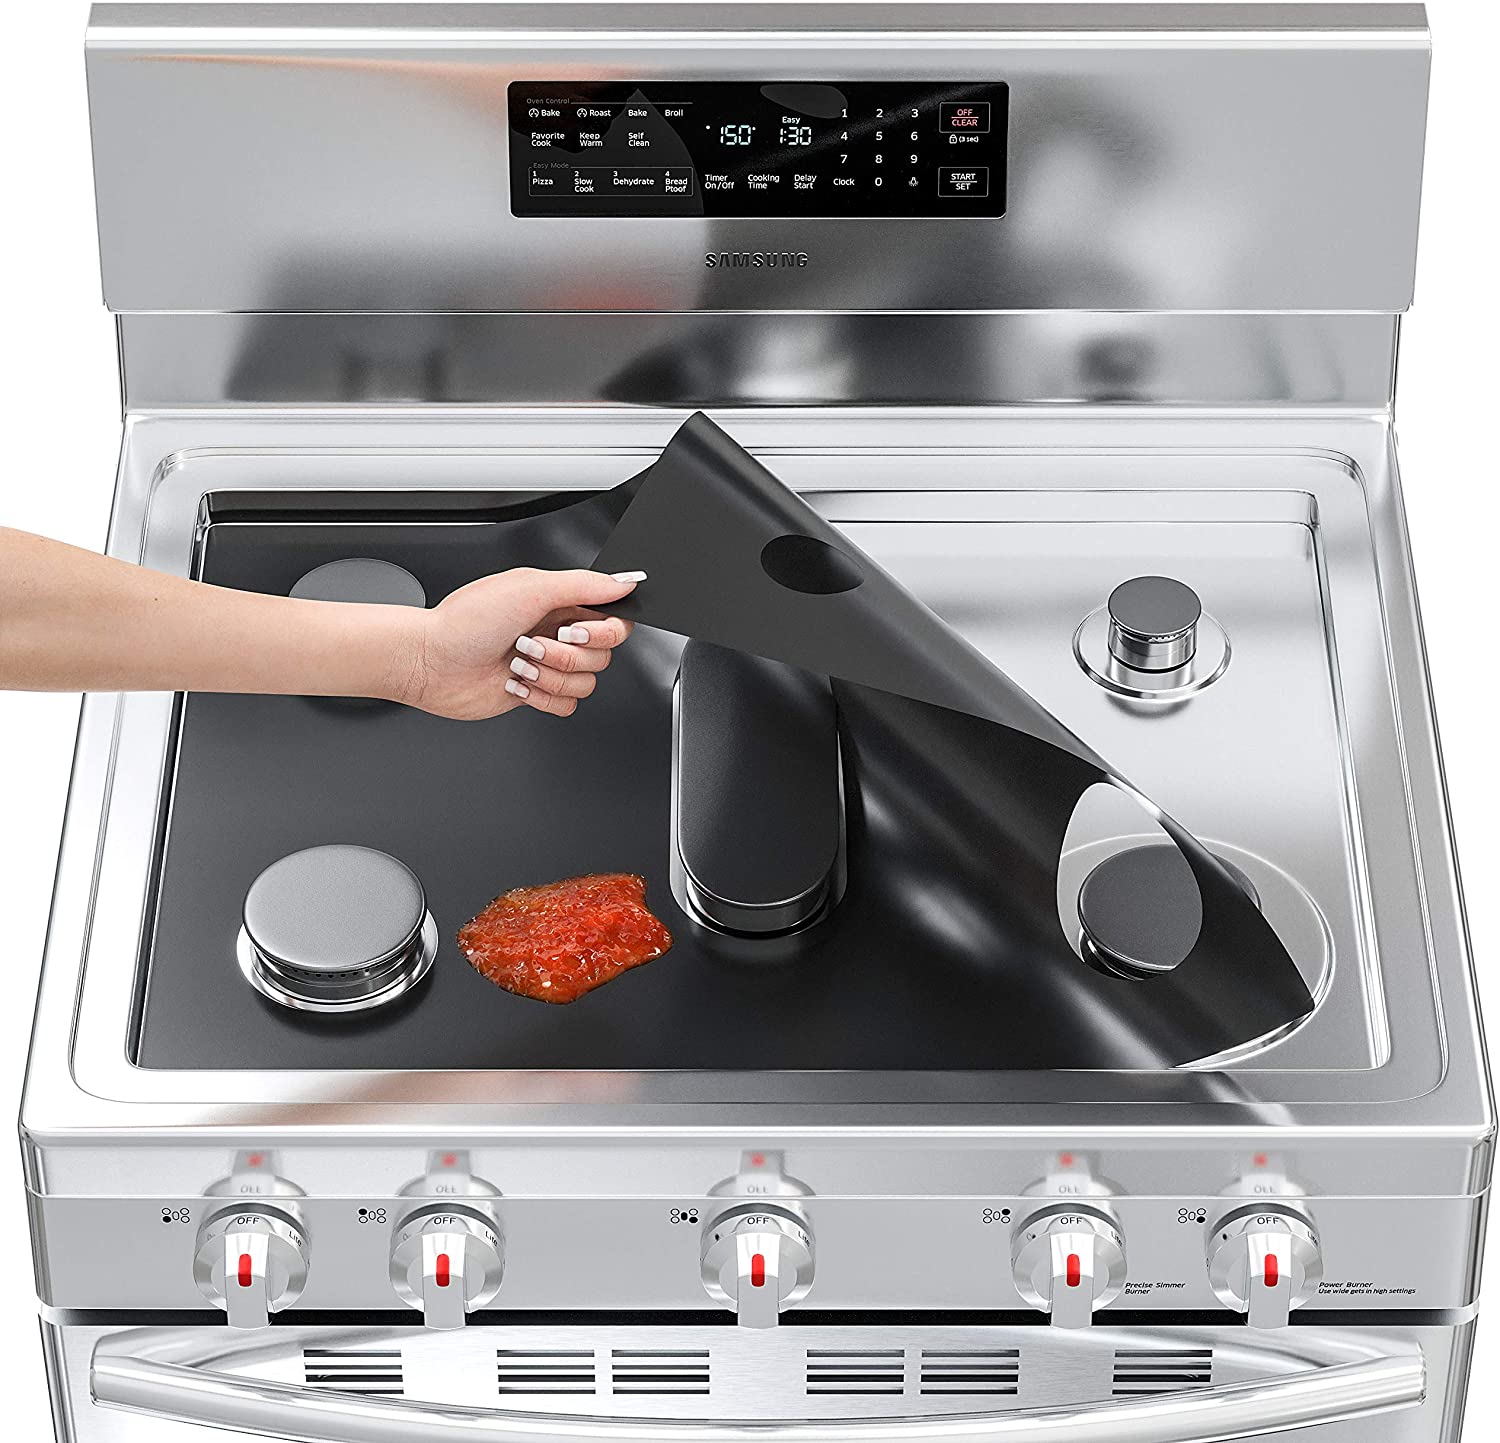  Skywin Stovetop Cover - Spill Guard Gas Range